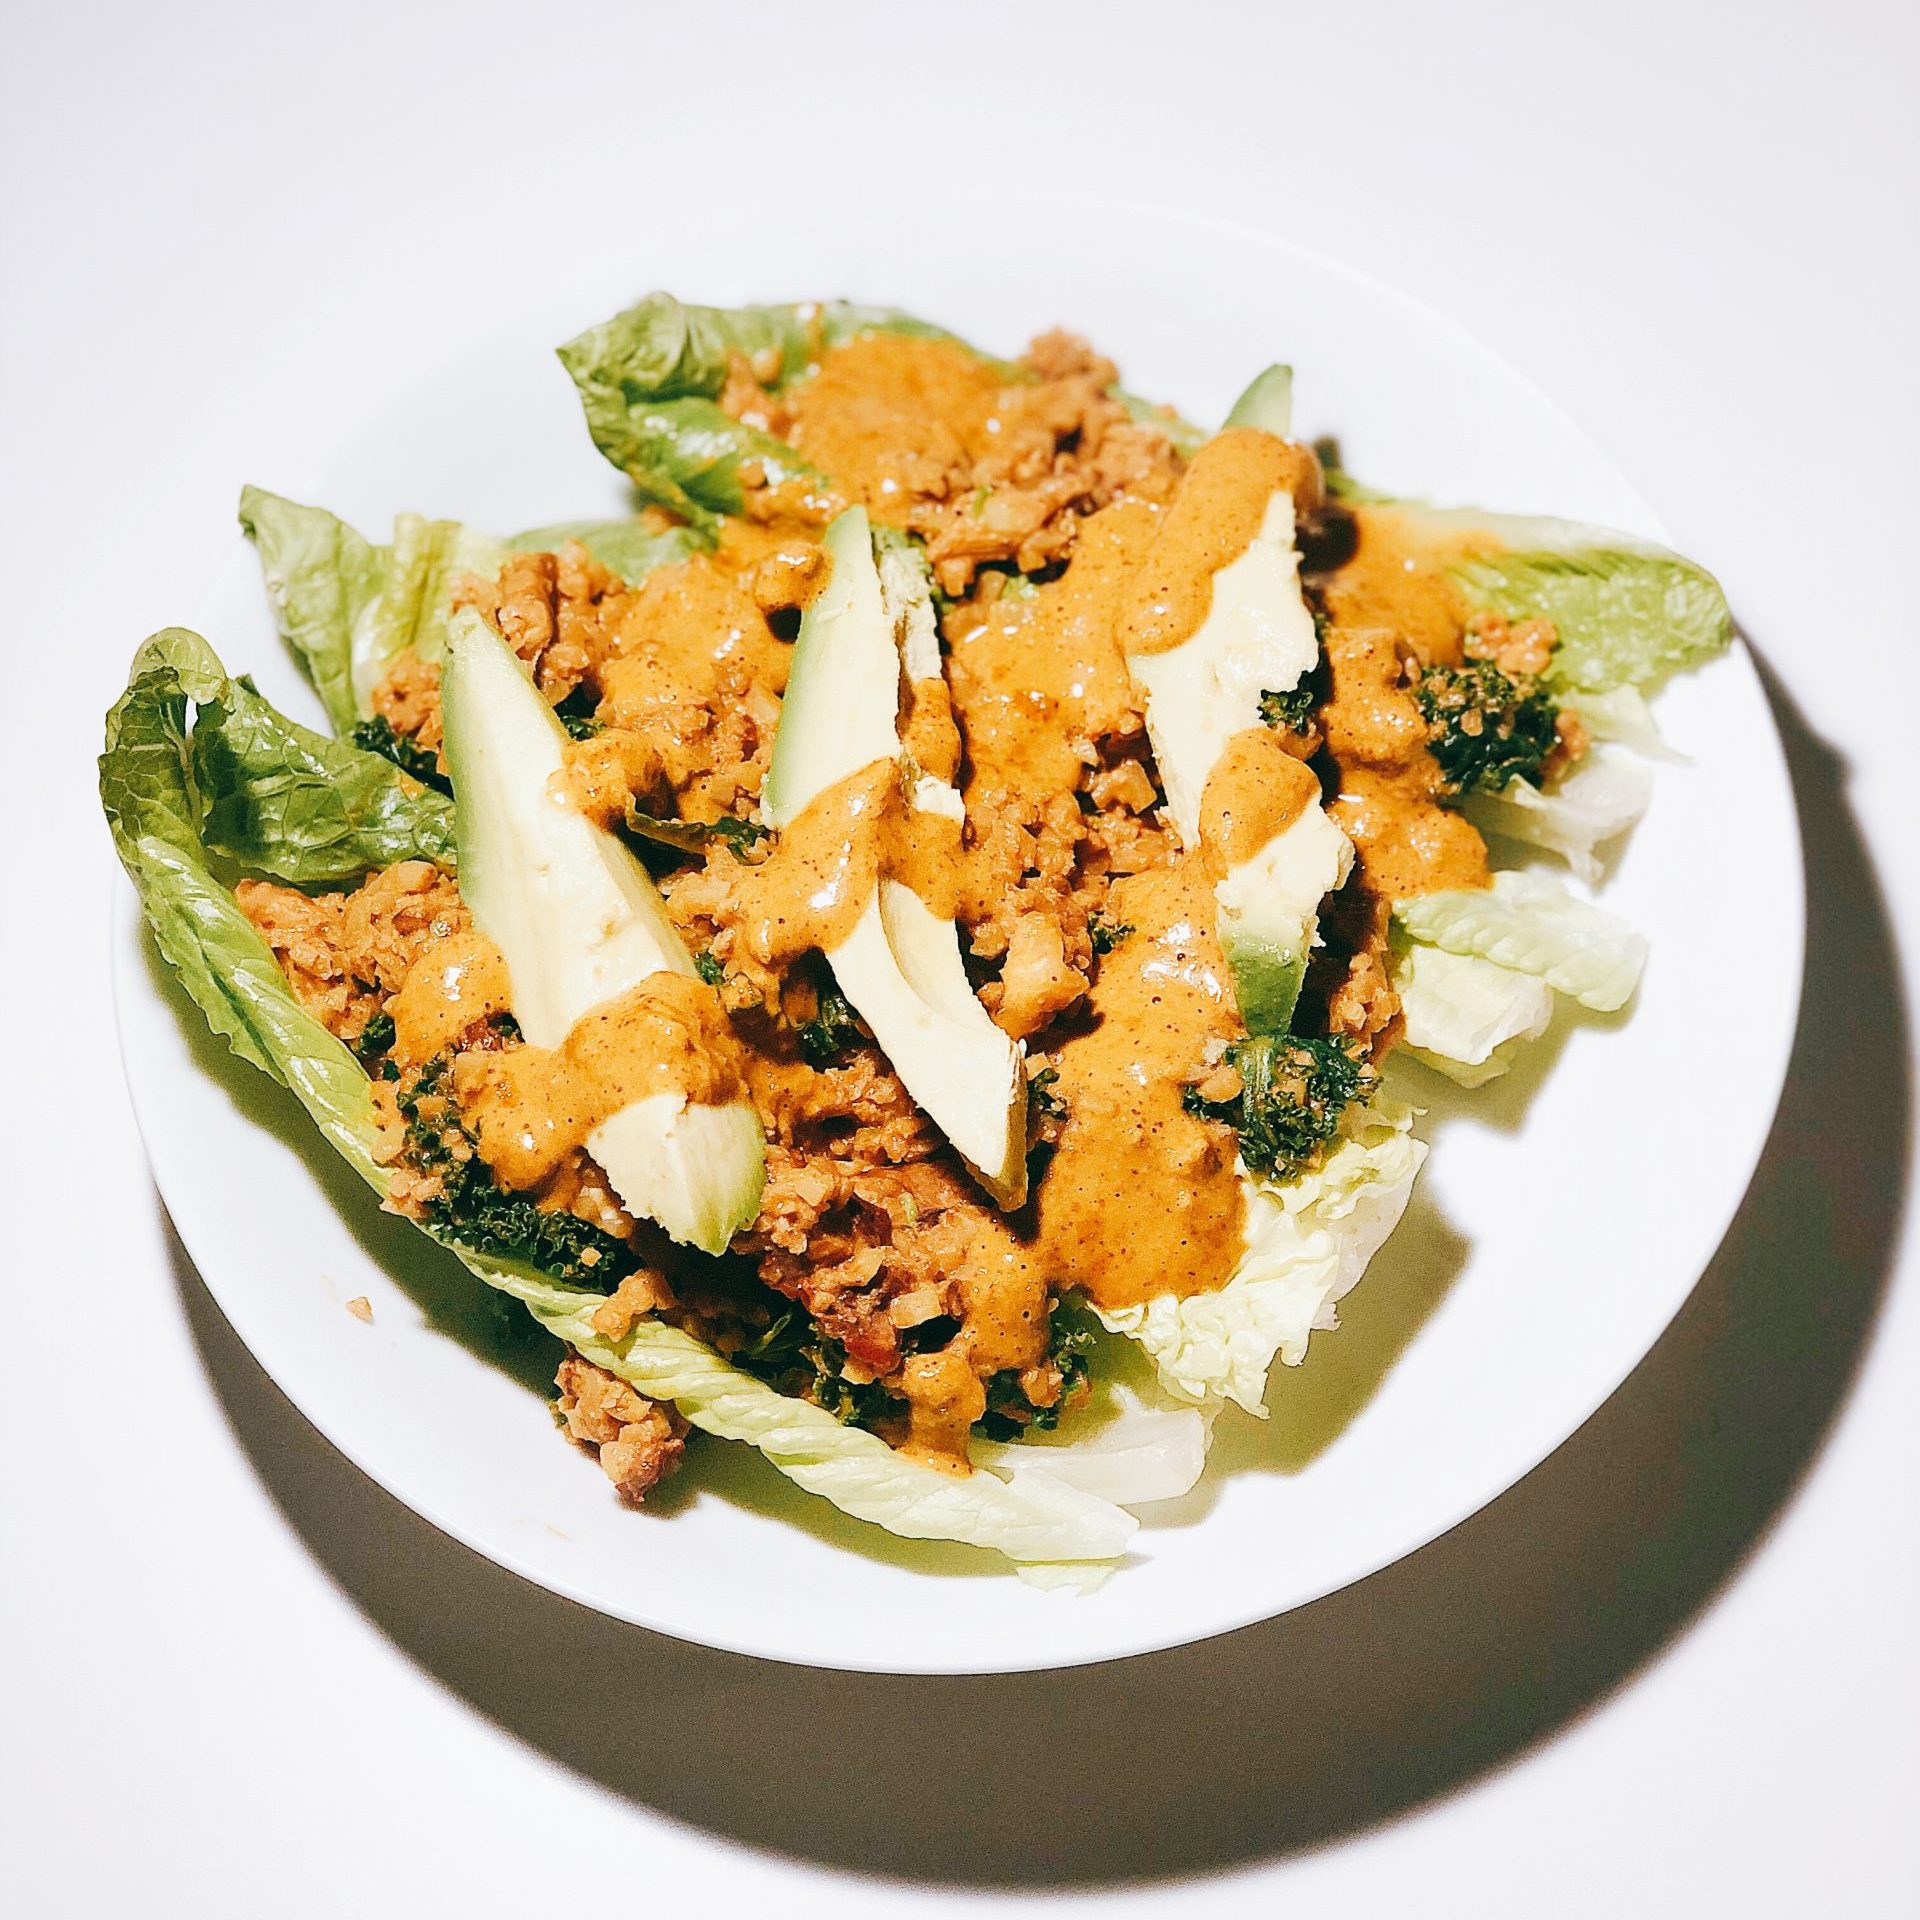 20-minute cauliflower walnut meat with cashew queso on a white plate. Ingredients are in a lettuce boat.